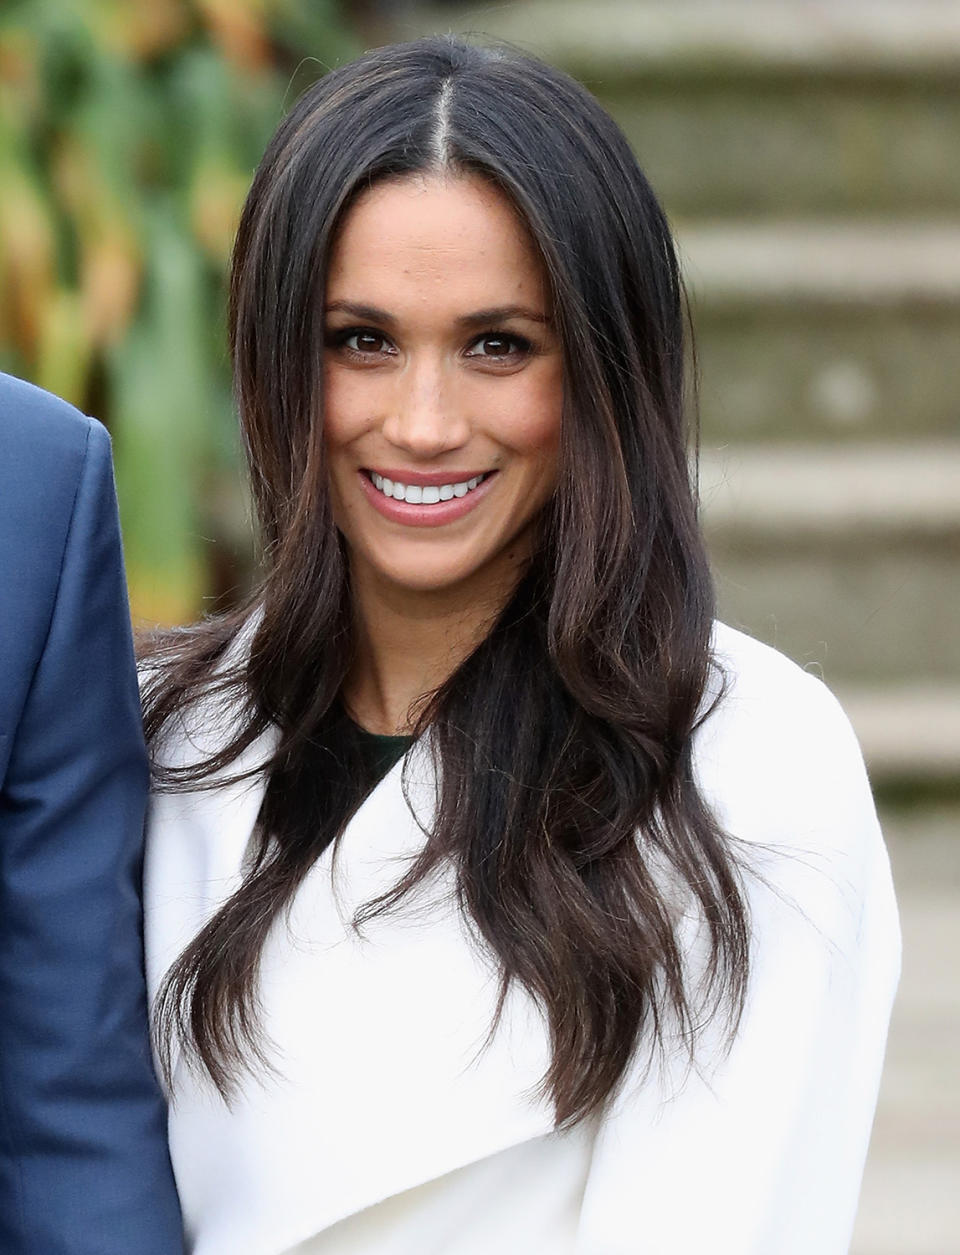 <p>At the official photo call to announce her engagement to Prince Harry, the 36-year-old smiled joyfully wearing long, luxurious layers. (Photo: Chris Jackson/Getty Images) </p>